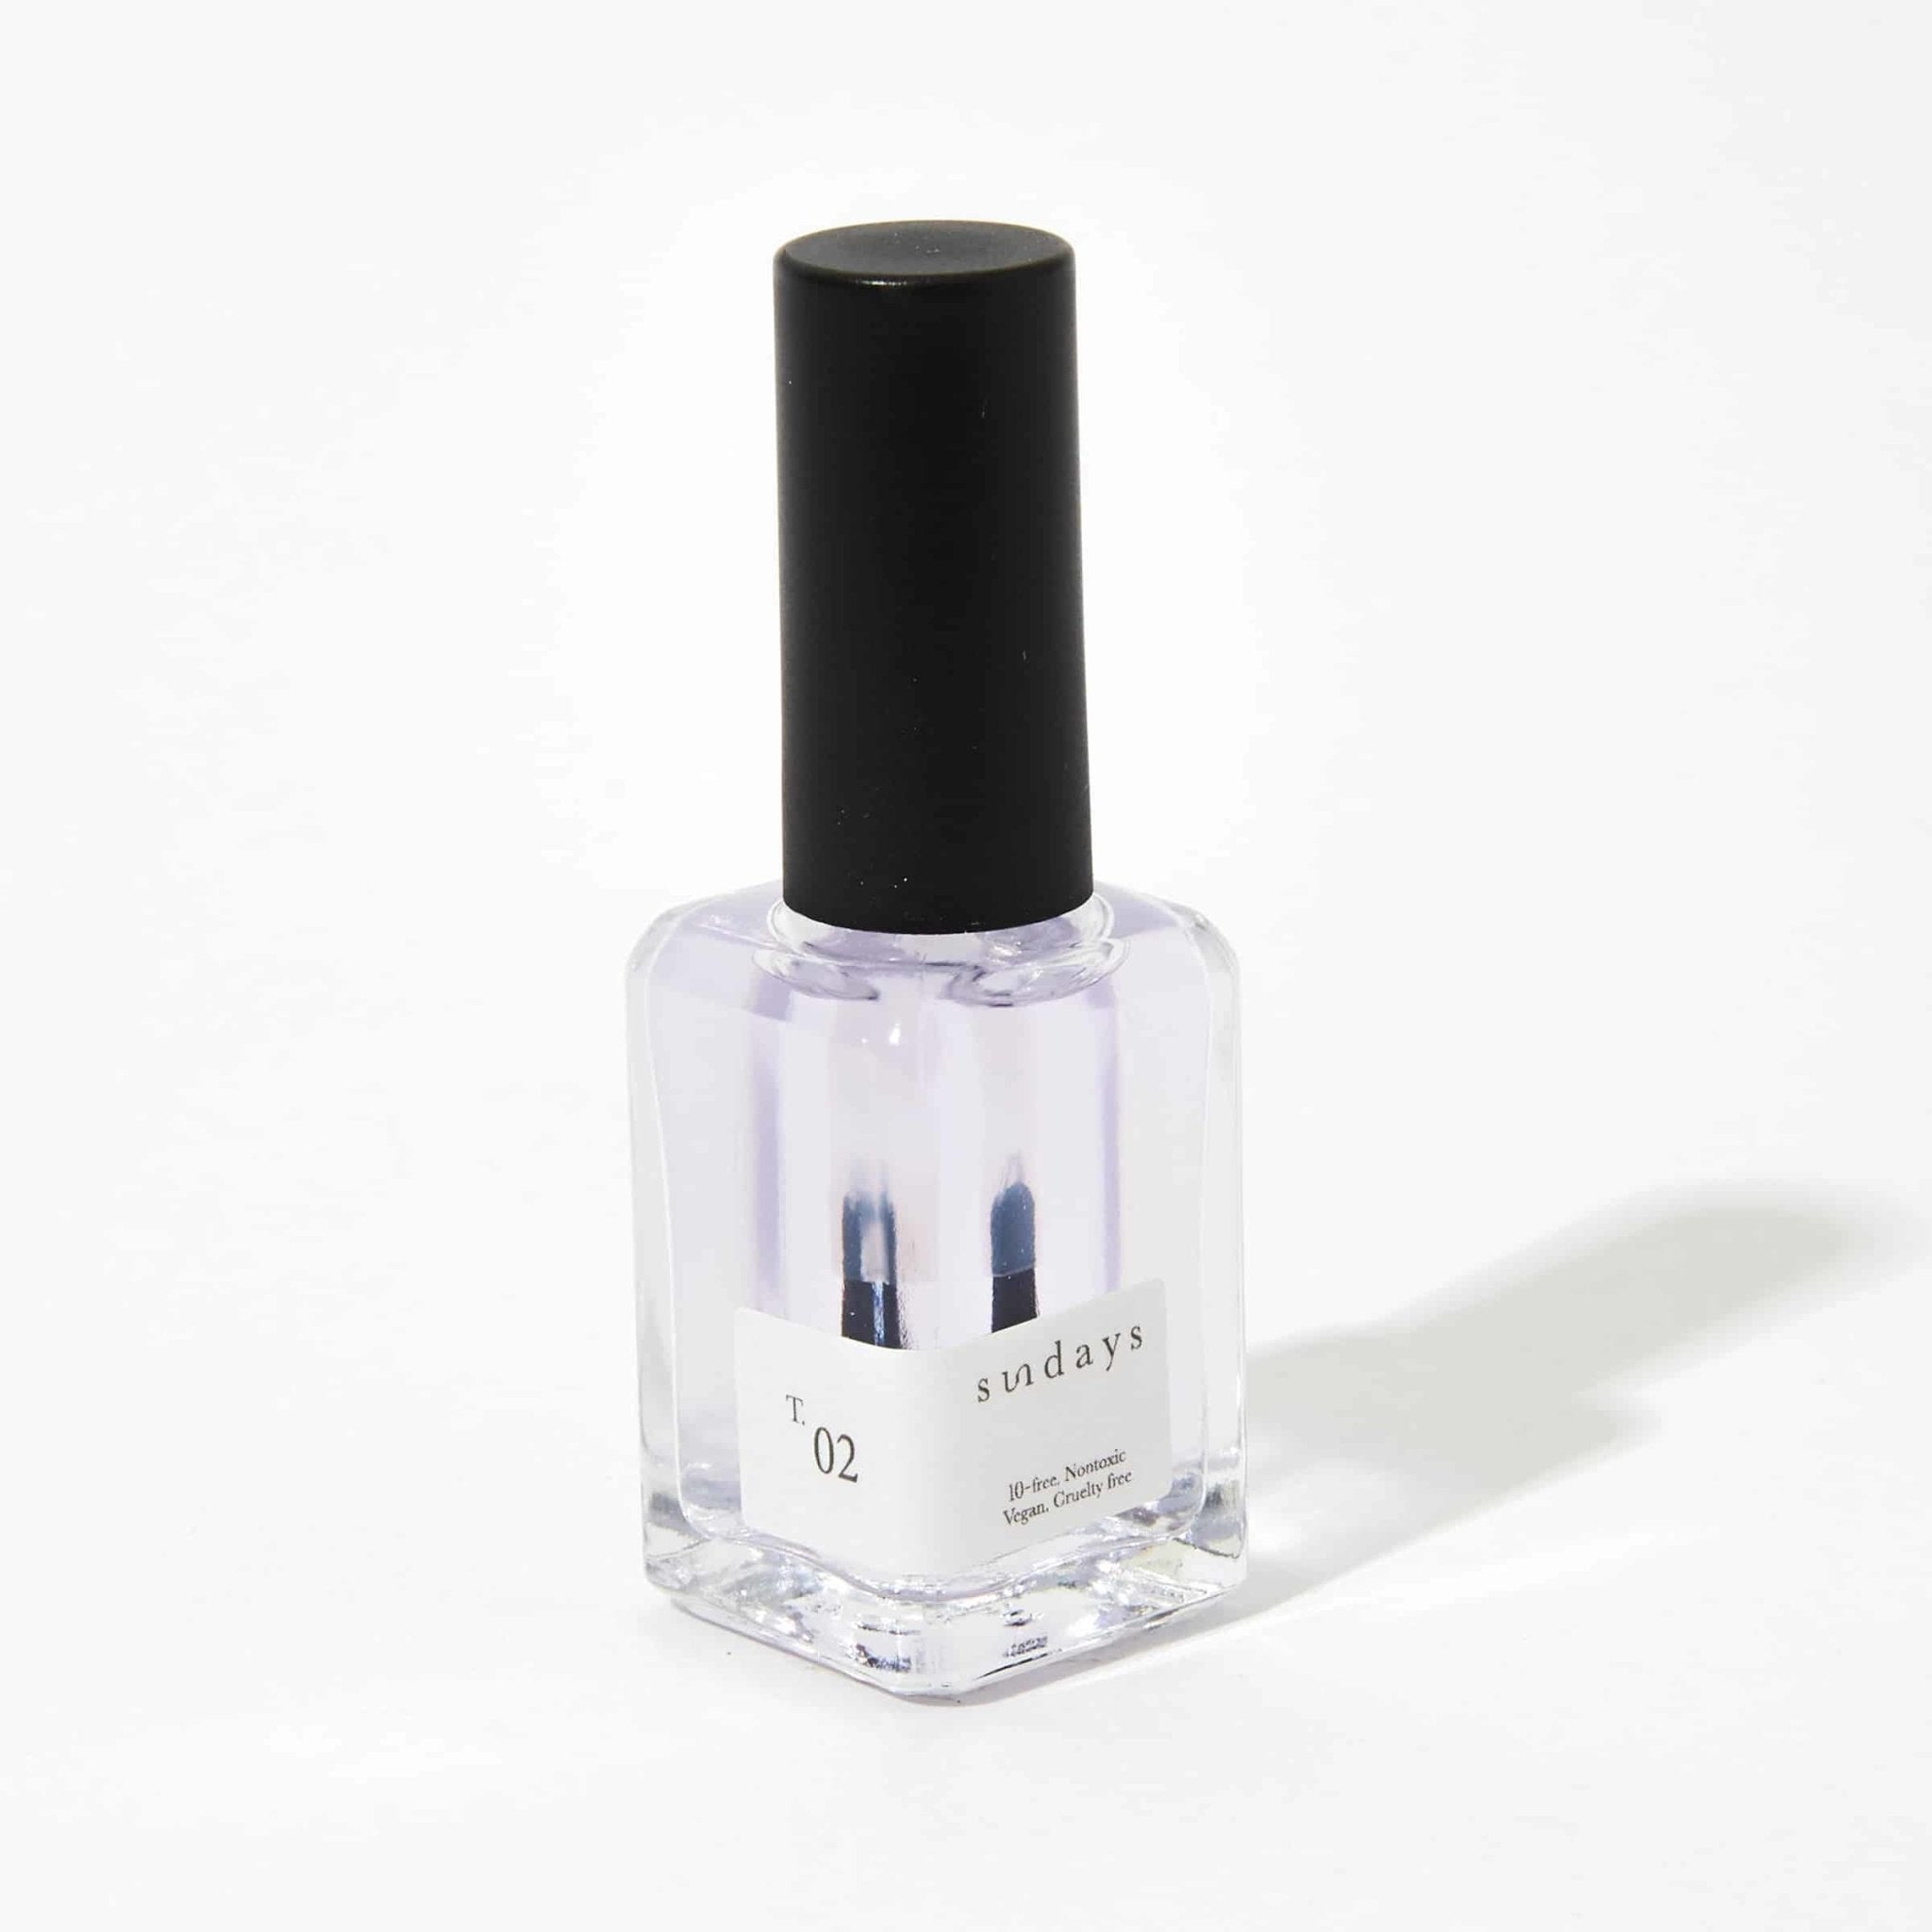 T.02 – Fast Drying Top Coat by Sundays Studio